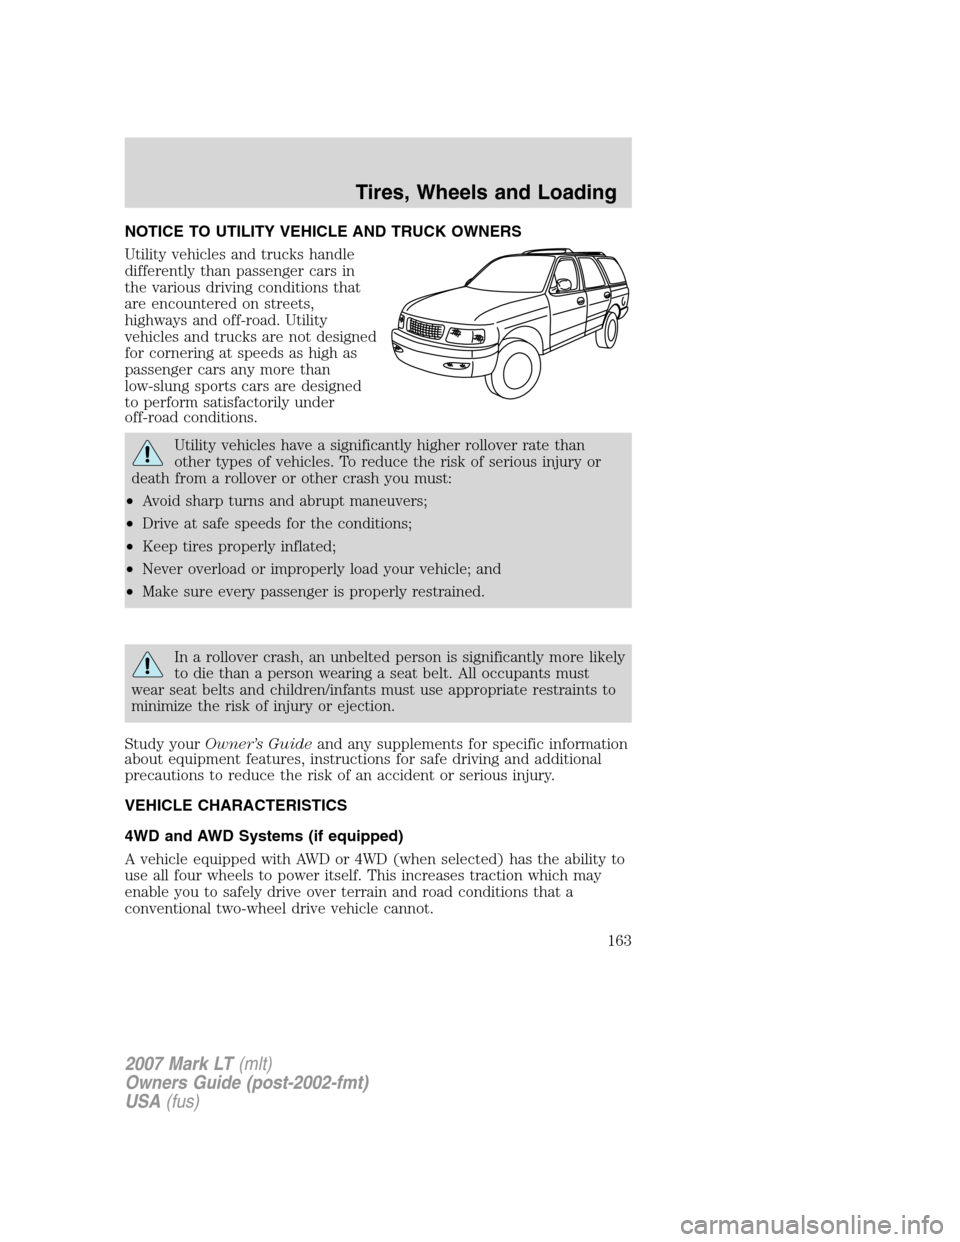 LINCOLN MARK LT 2007  Owners Manual NOTICE TO UTILITY VEHICLE AND TRUCK OWNERS
Utility vehicles and trucks handle
differently than passenger cars in
the various driving conditions that
are encountered on streets,
highways and off-road. 